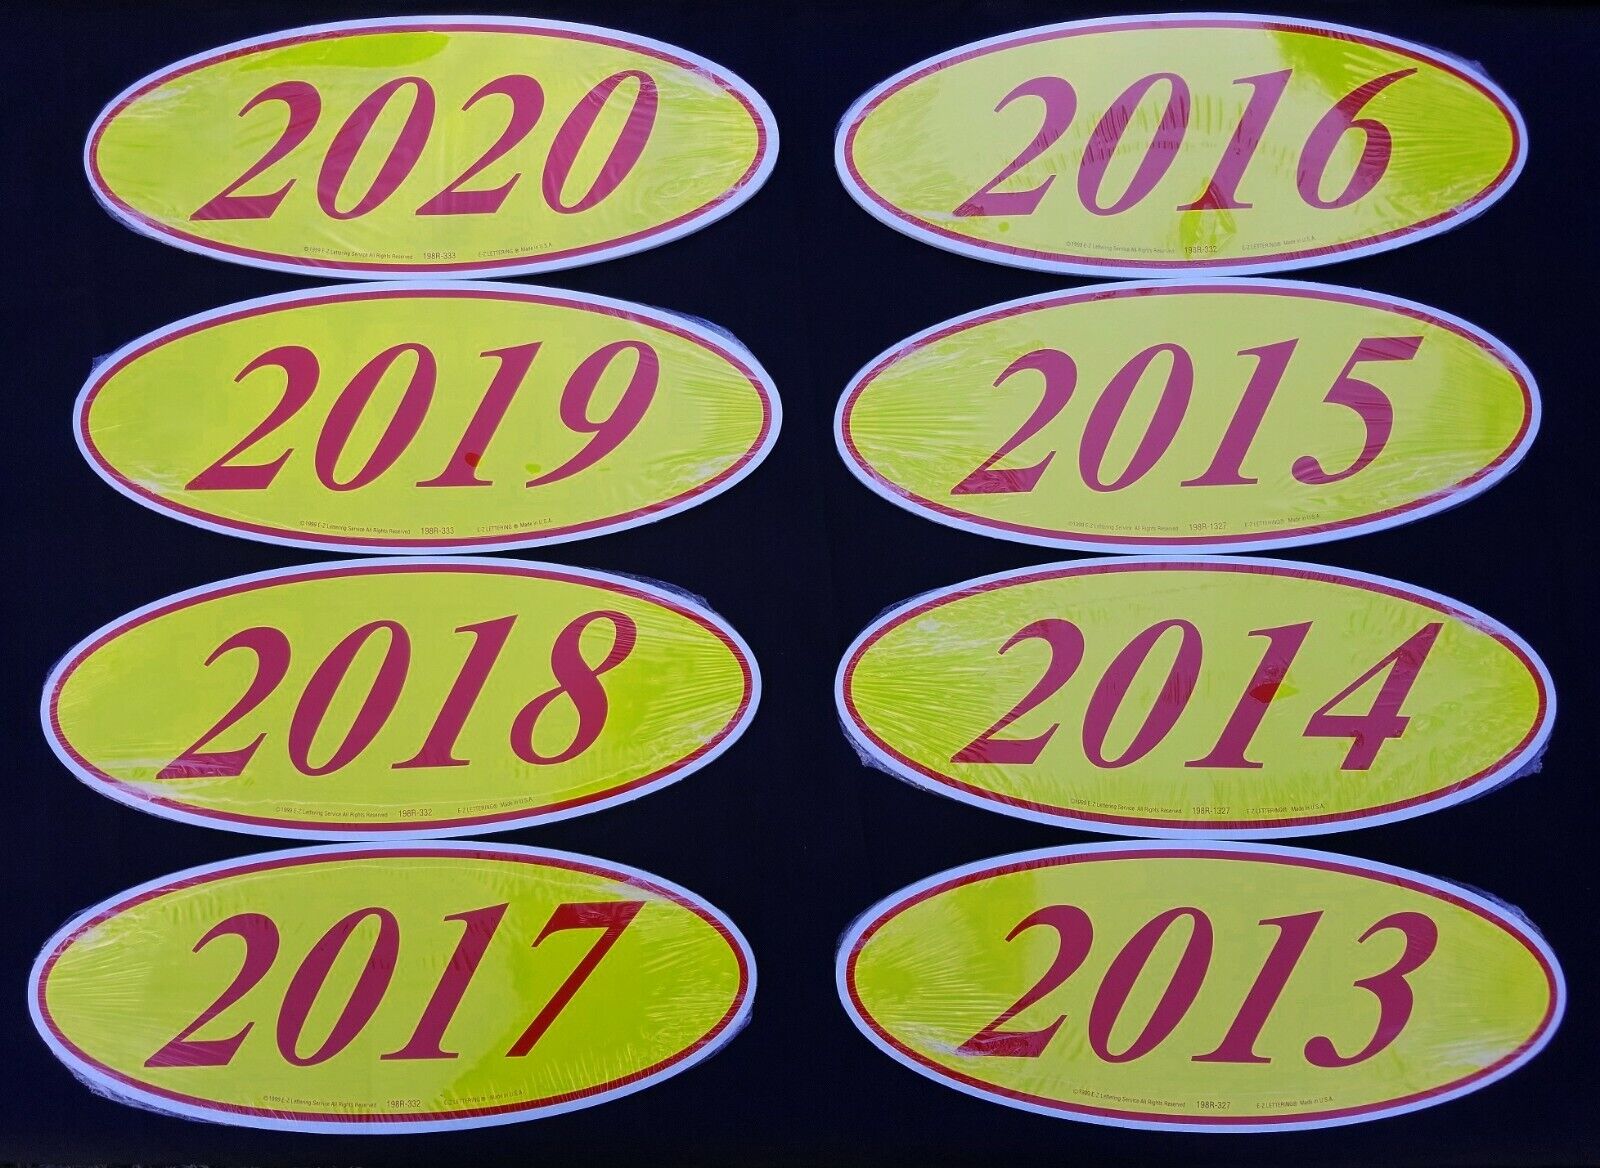 Car Dealer Windshield Oval Model Year Stickers (8 packs) Red and Yellow